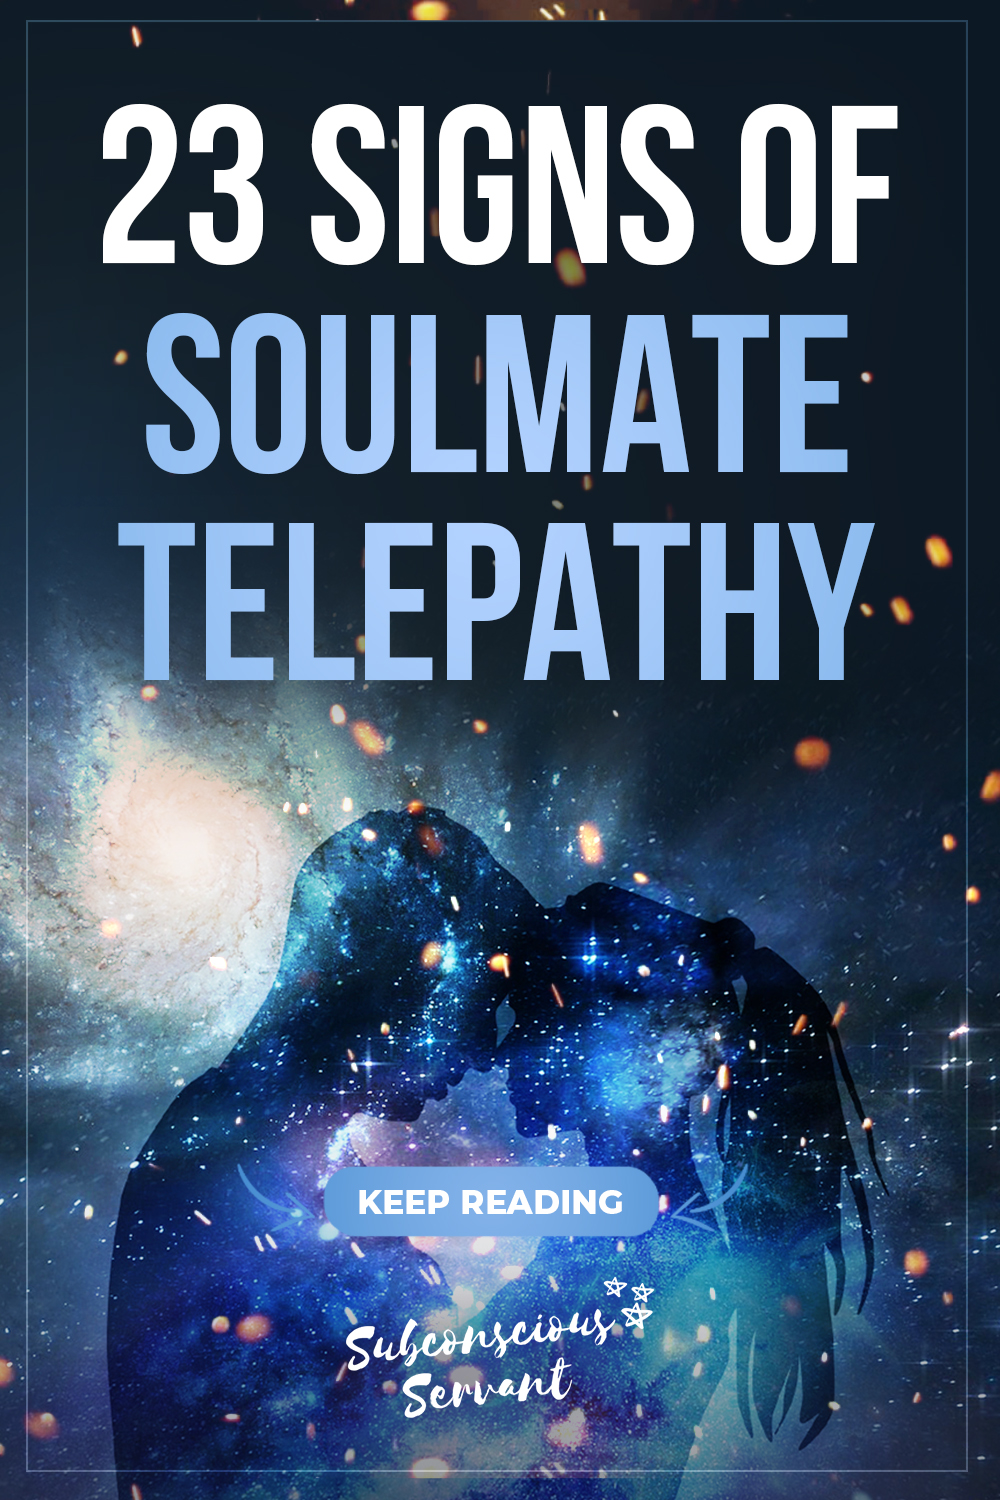 23 Amazing Signs Of Soulmate Telepathy (Experienced Any?)